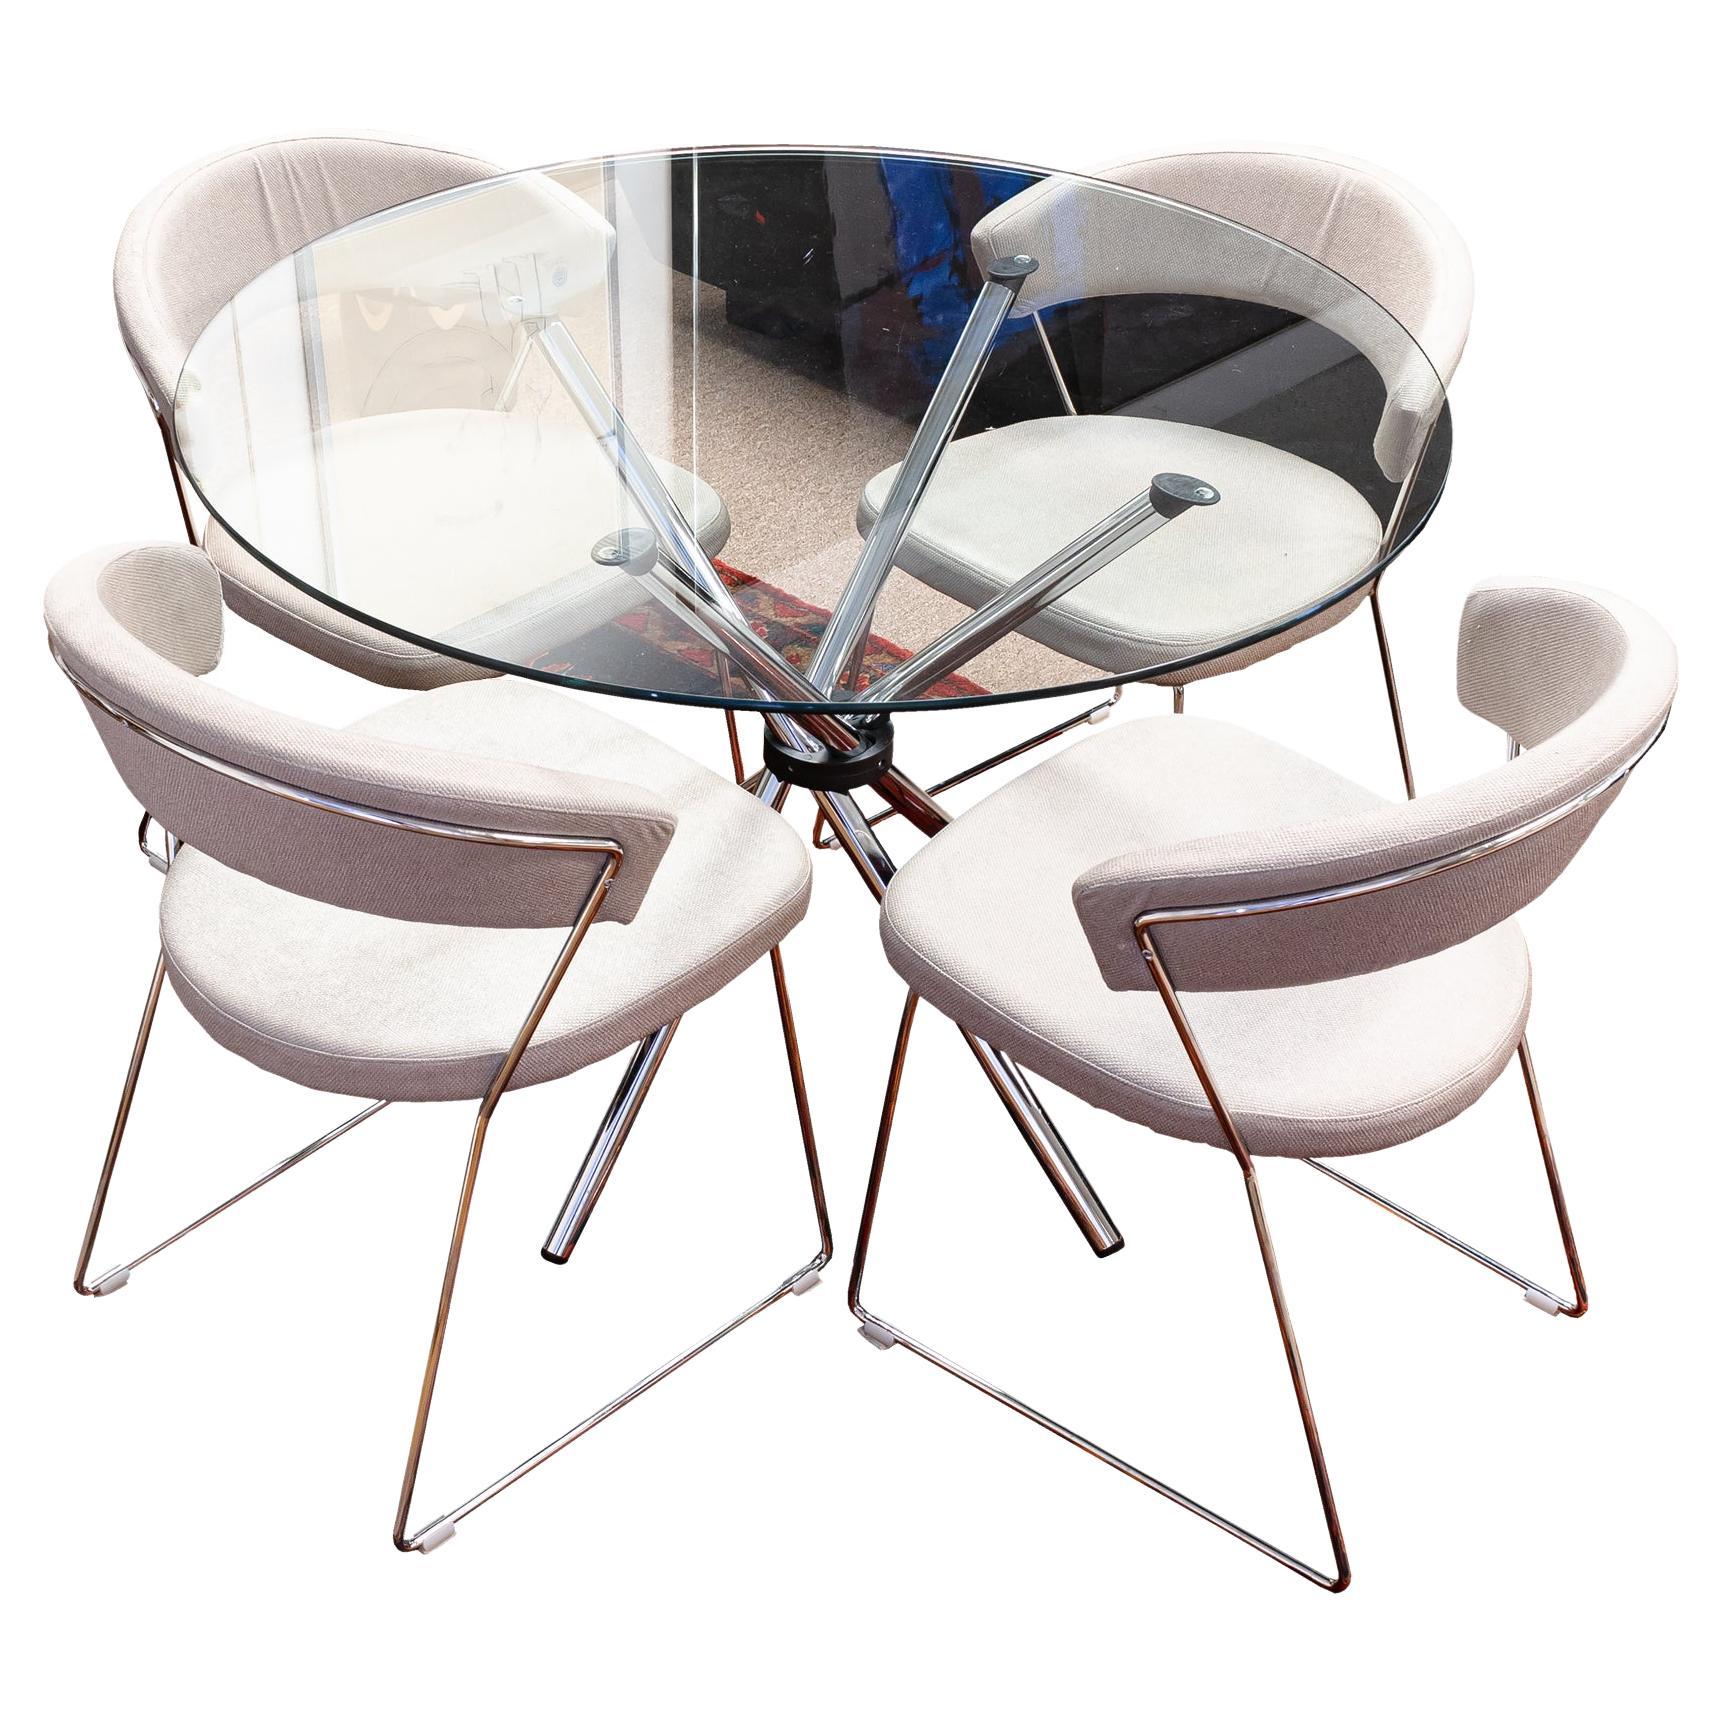 Calligaris Tables - 4 For Sale at 1stDibs | calligaris dining tables,  calligaris round table, tables calligaris